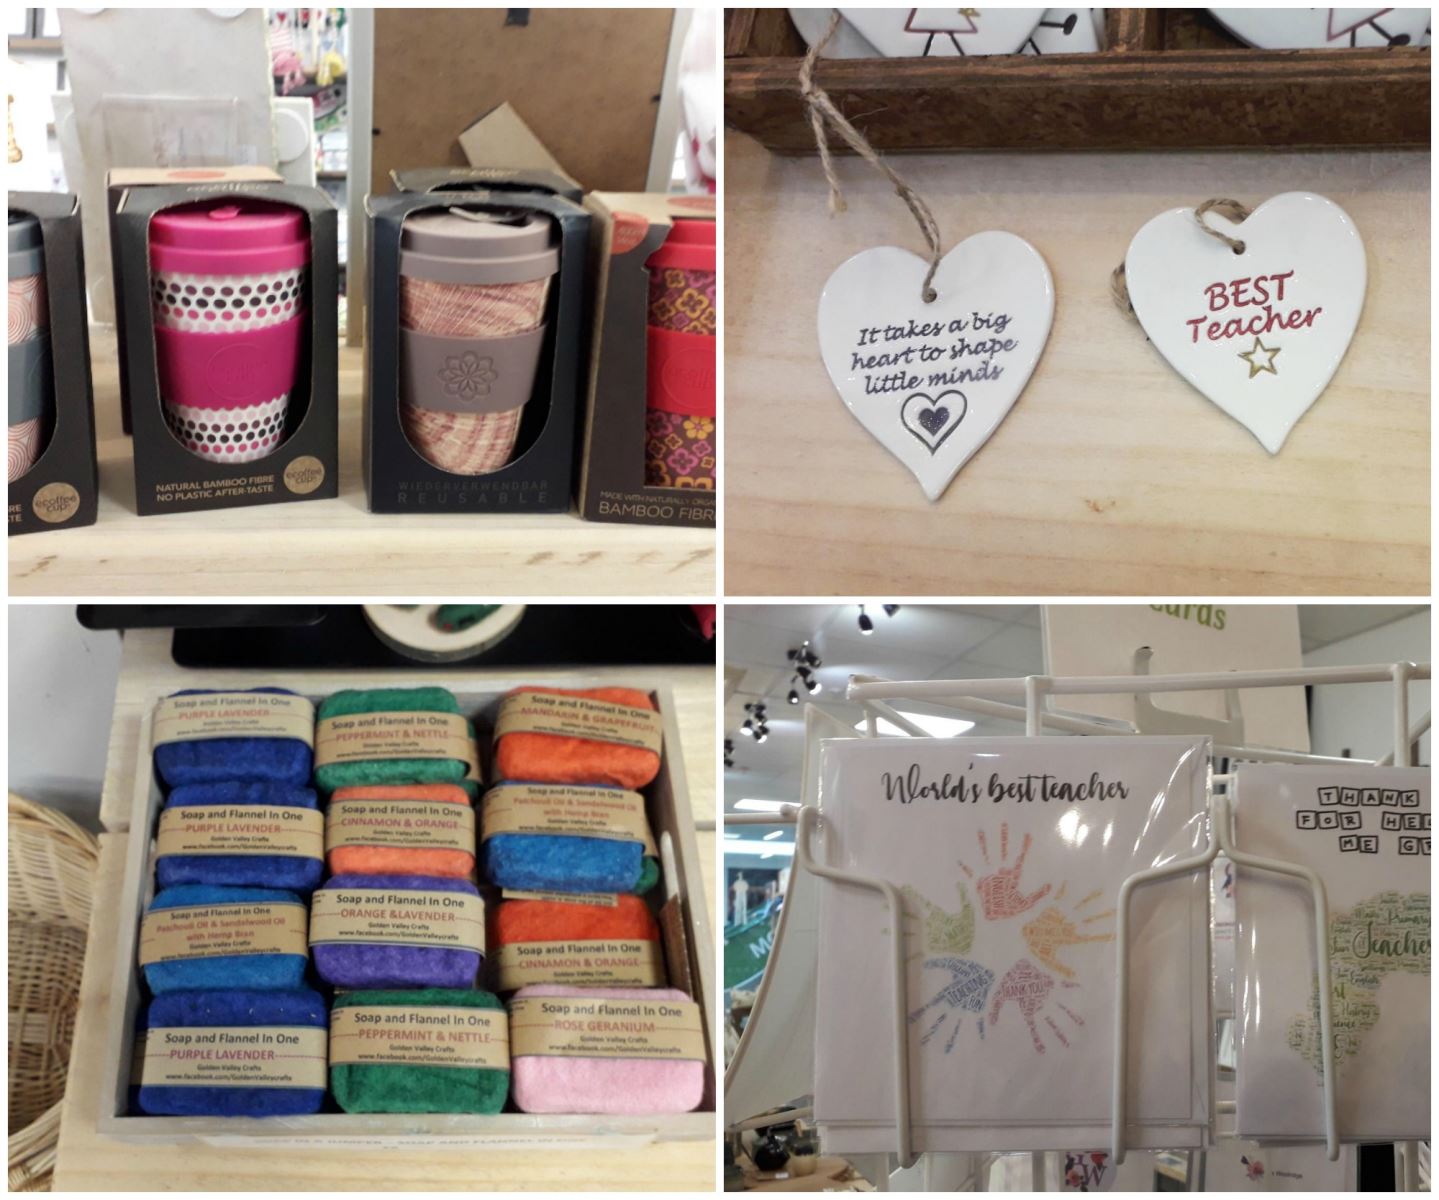 Gifts available at Cotswold Galleria